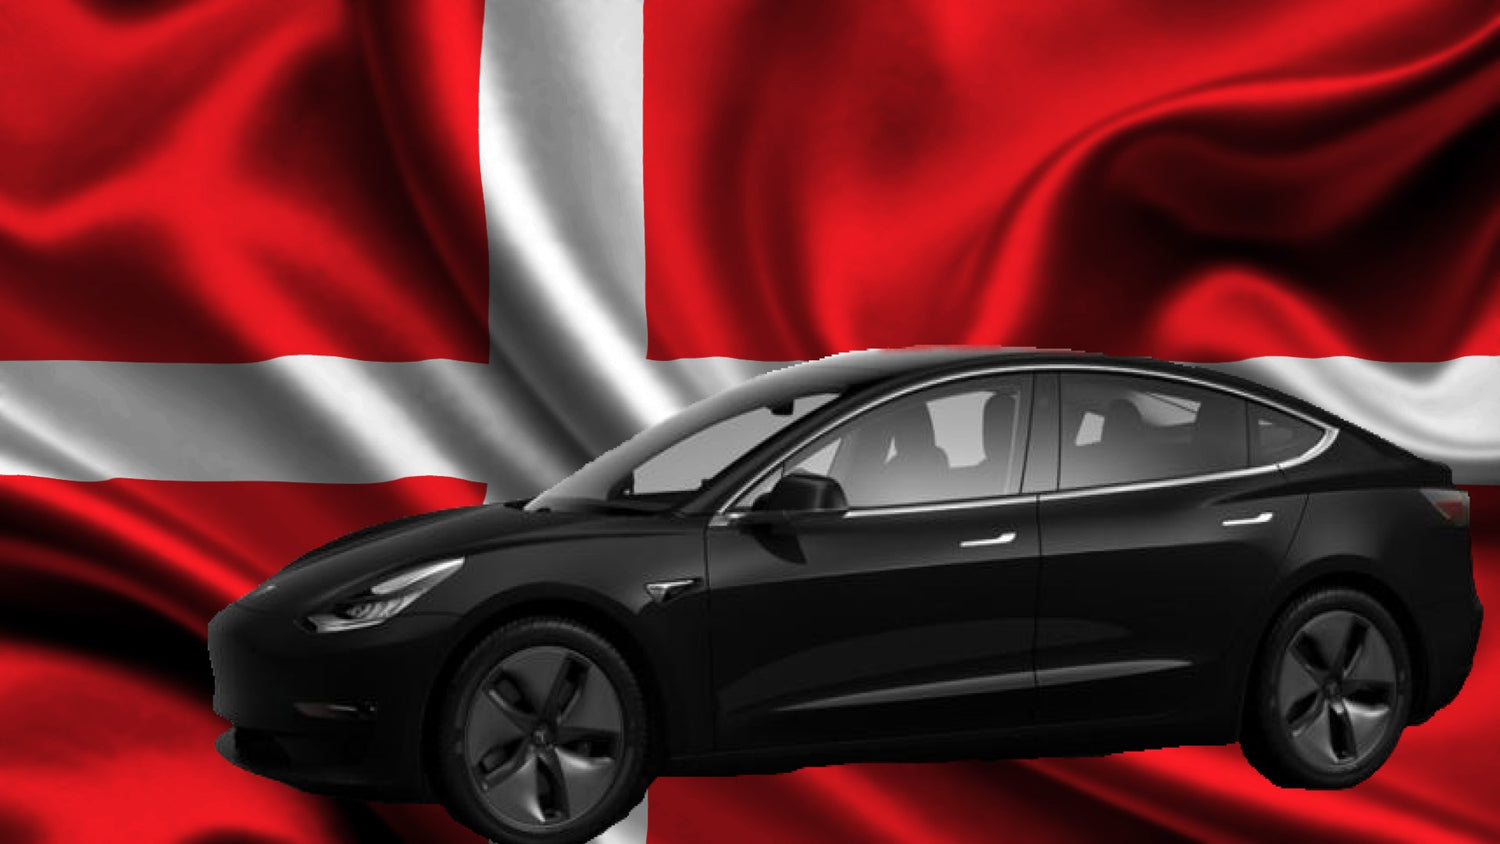 Tesla Model 3 wins the title Car of the Year 2020 in Denmark